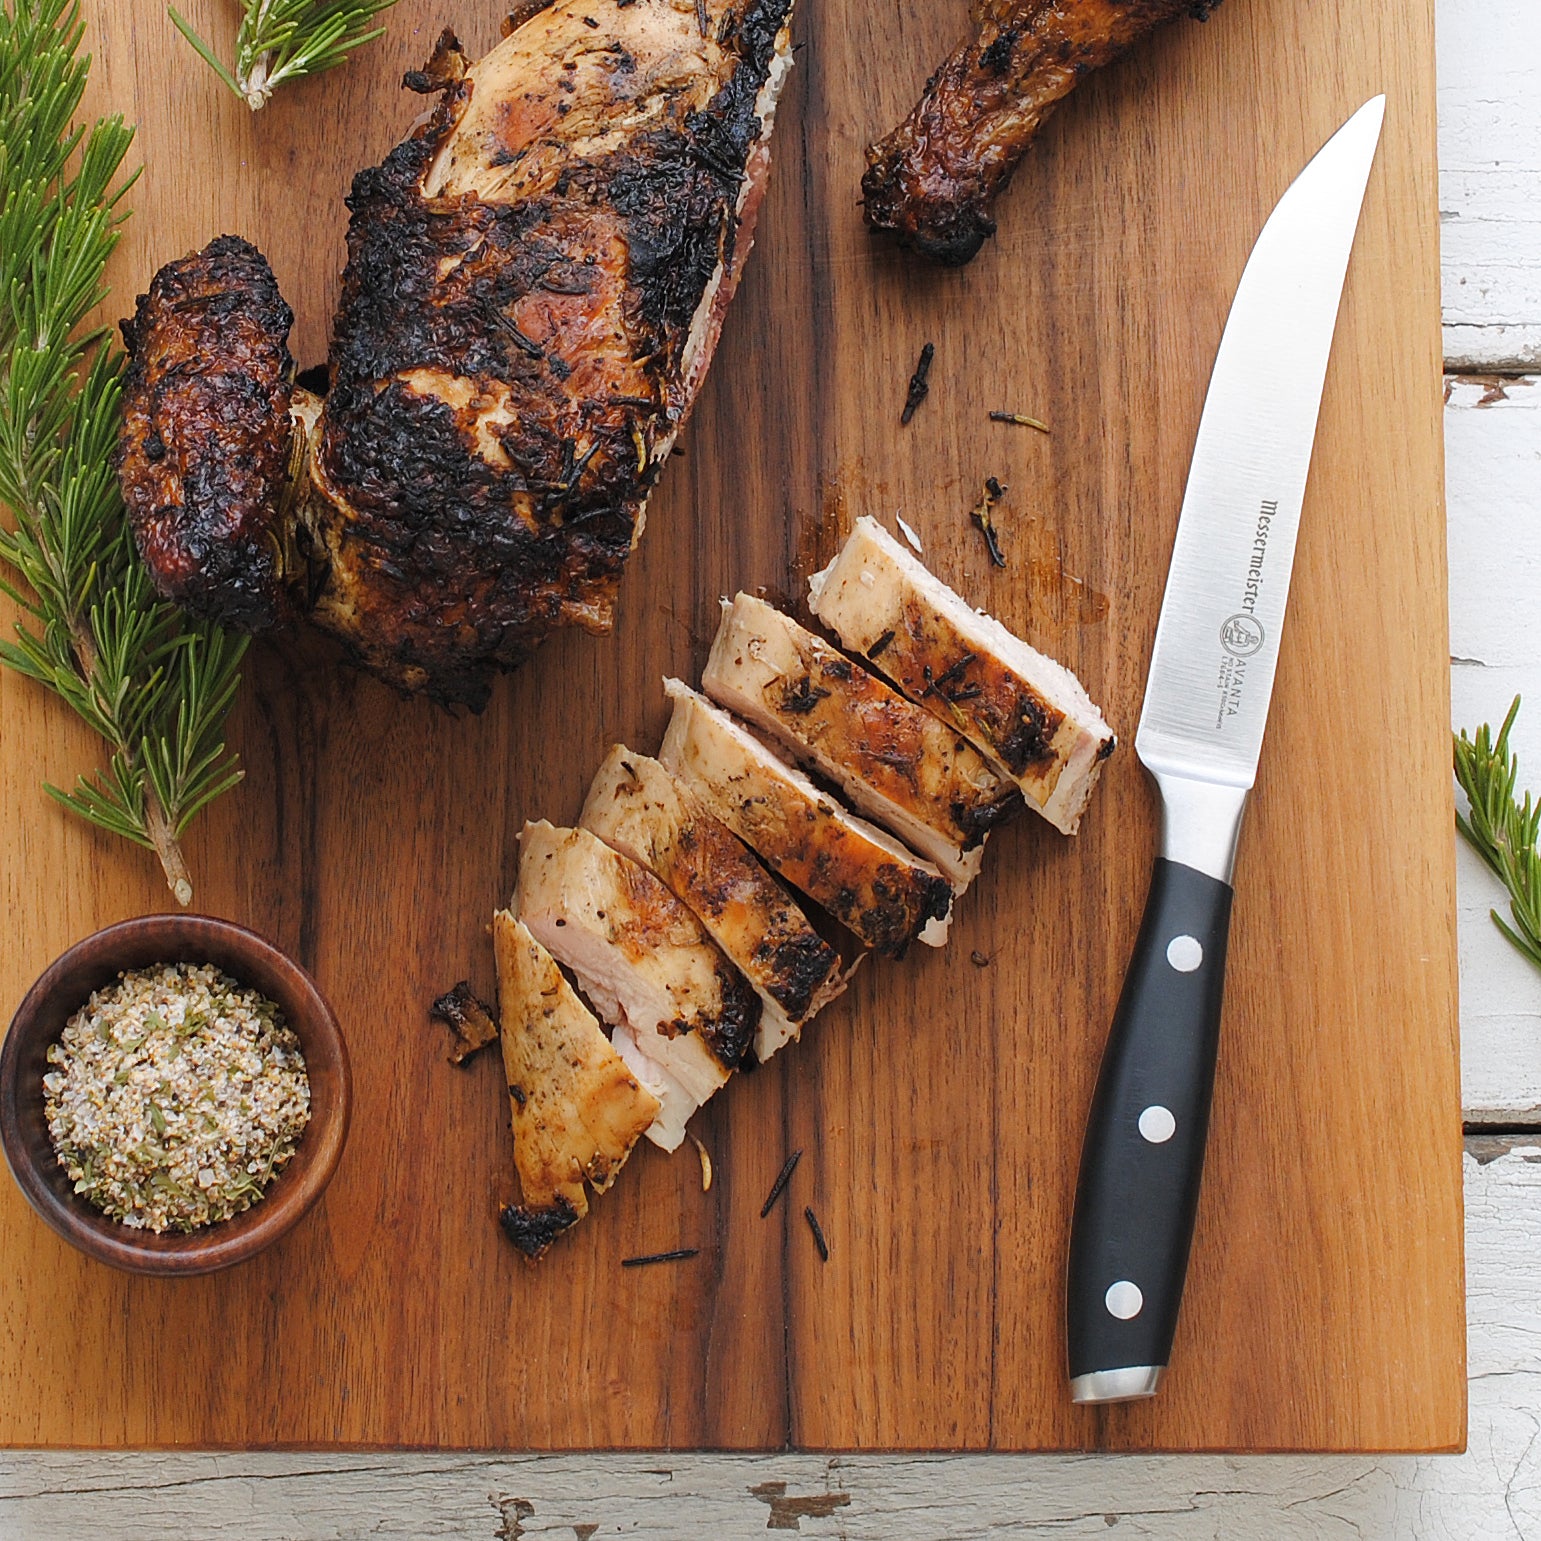 The 12 Best Steak Knife Sets To Enhance Your Meat-Eating